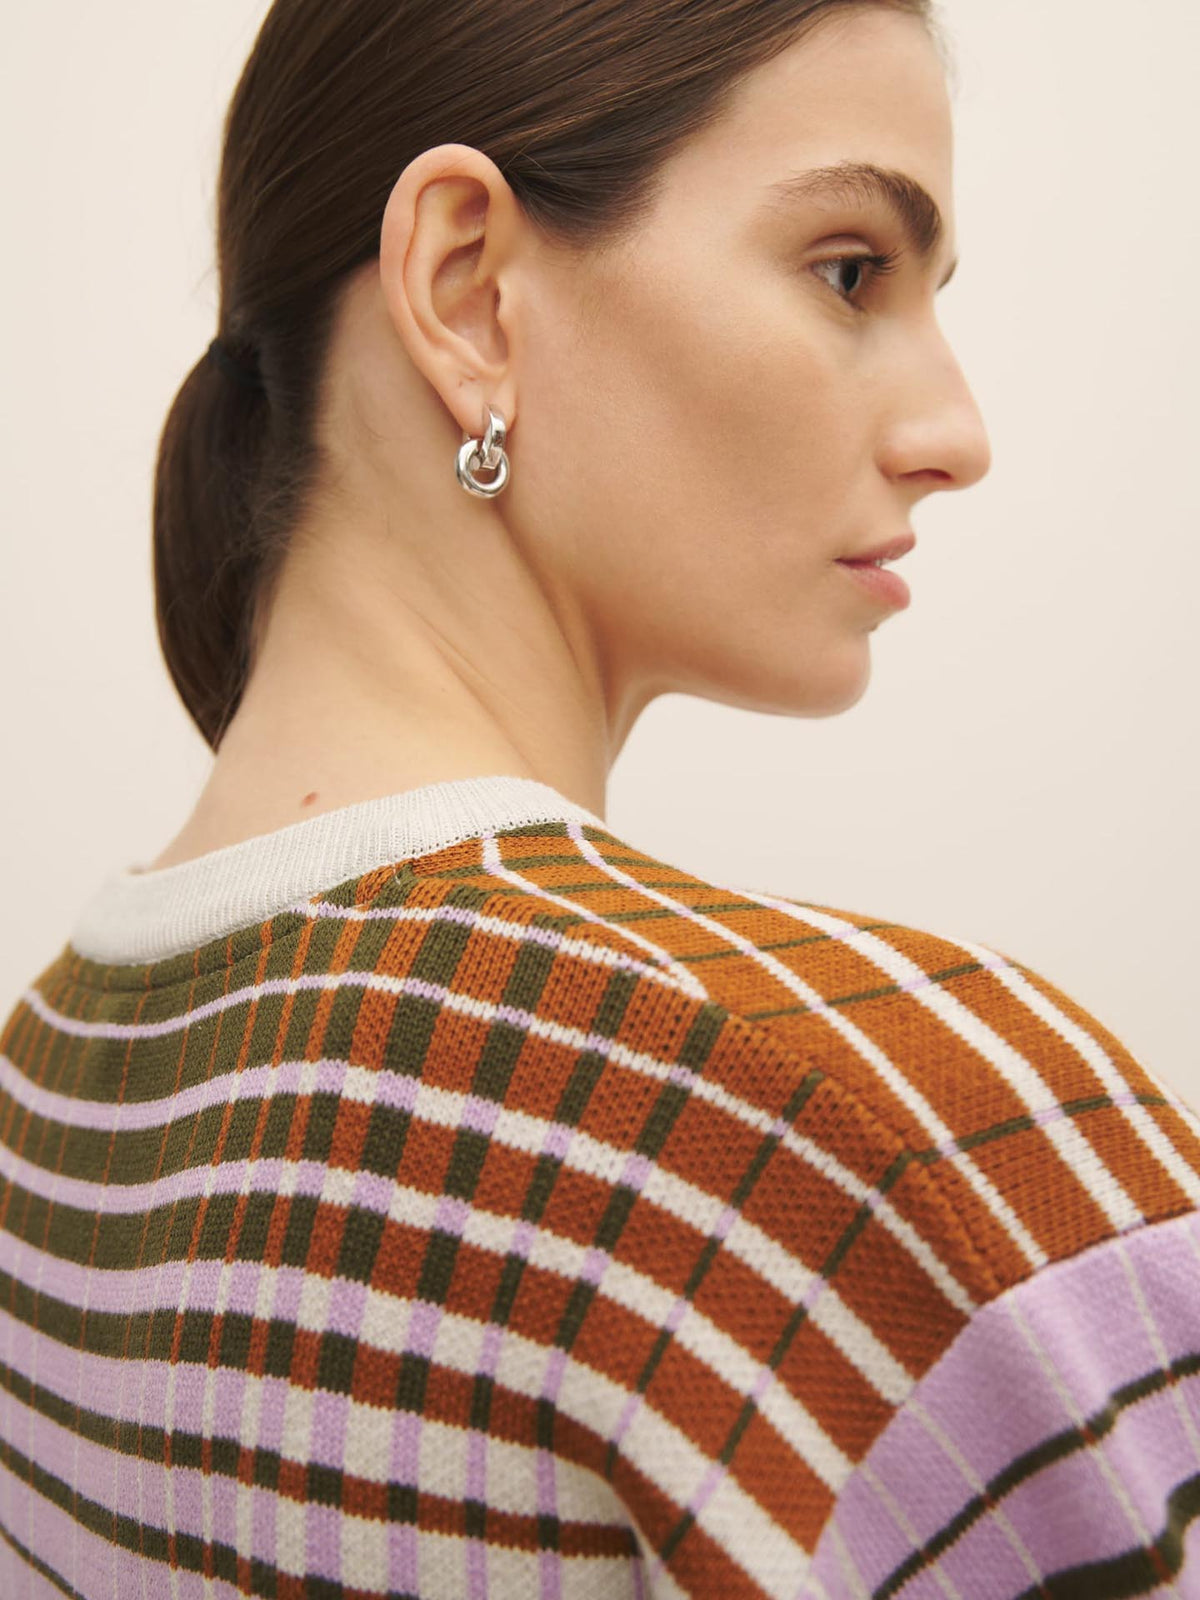 Side profile of a woman wearing an oversized Kowtow Gradient Knit Top plaid sweater and a silver hoop earring, with her hair styled in a low ponytail.